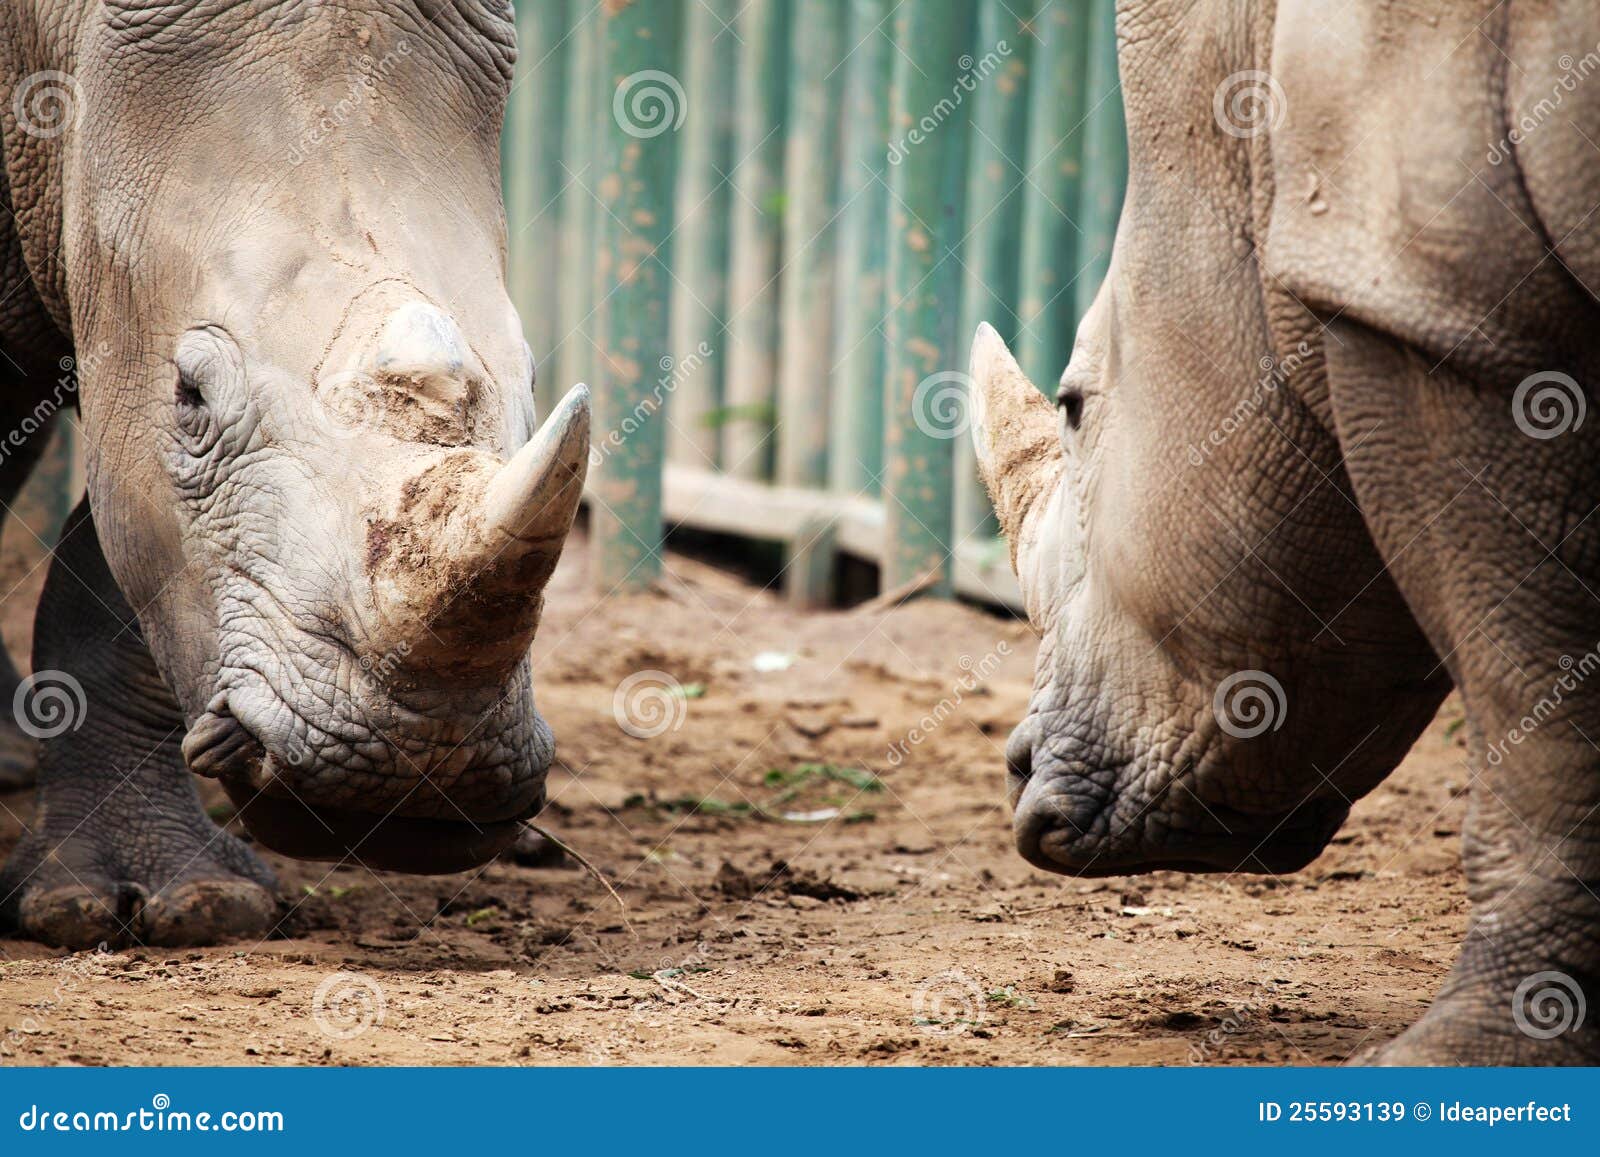 two rhinoceroses in confrontation.